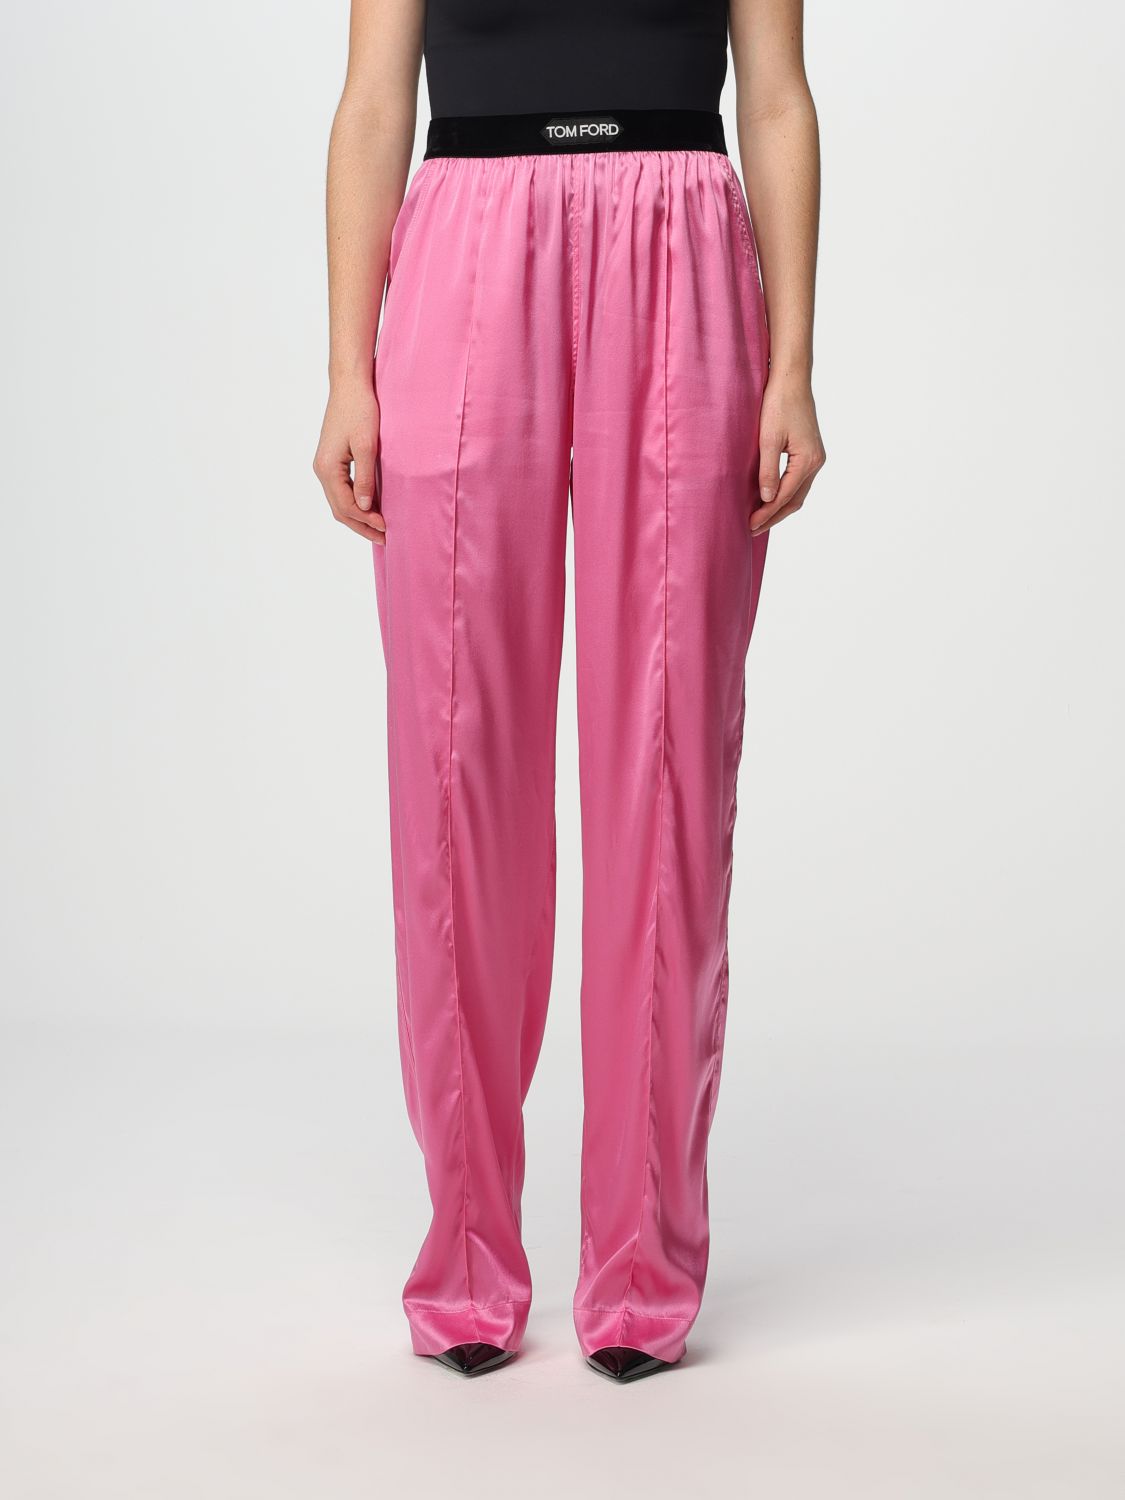 Tom Ford Trousers  Woman In Pink